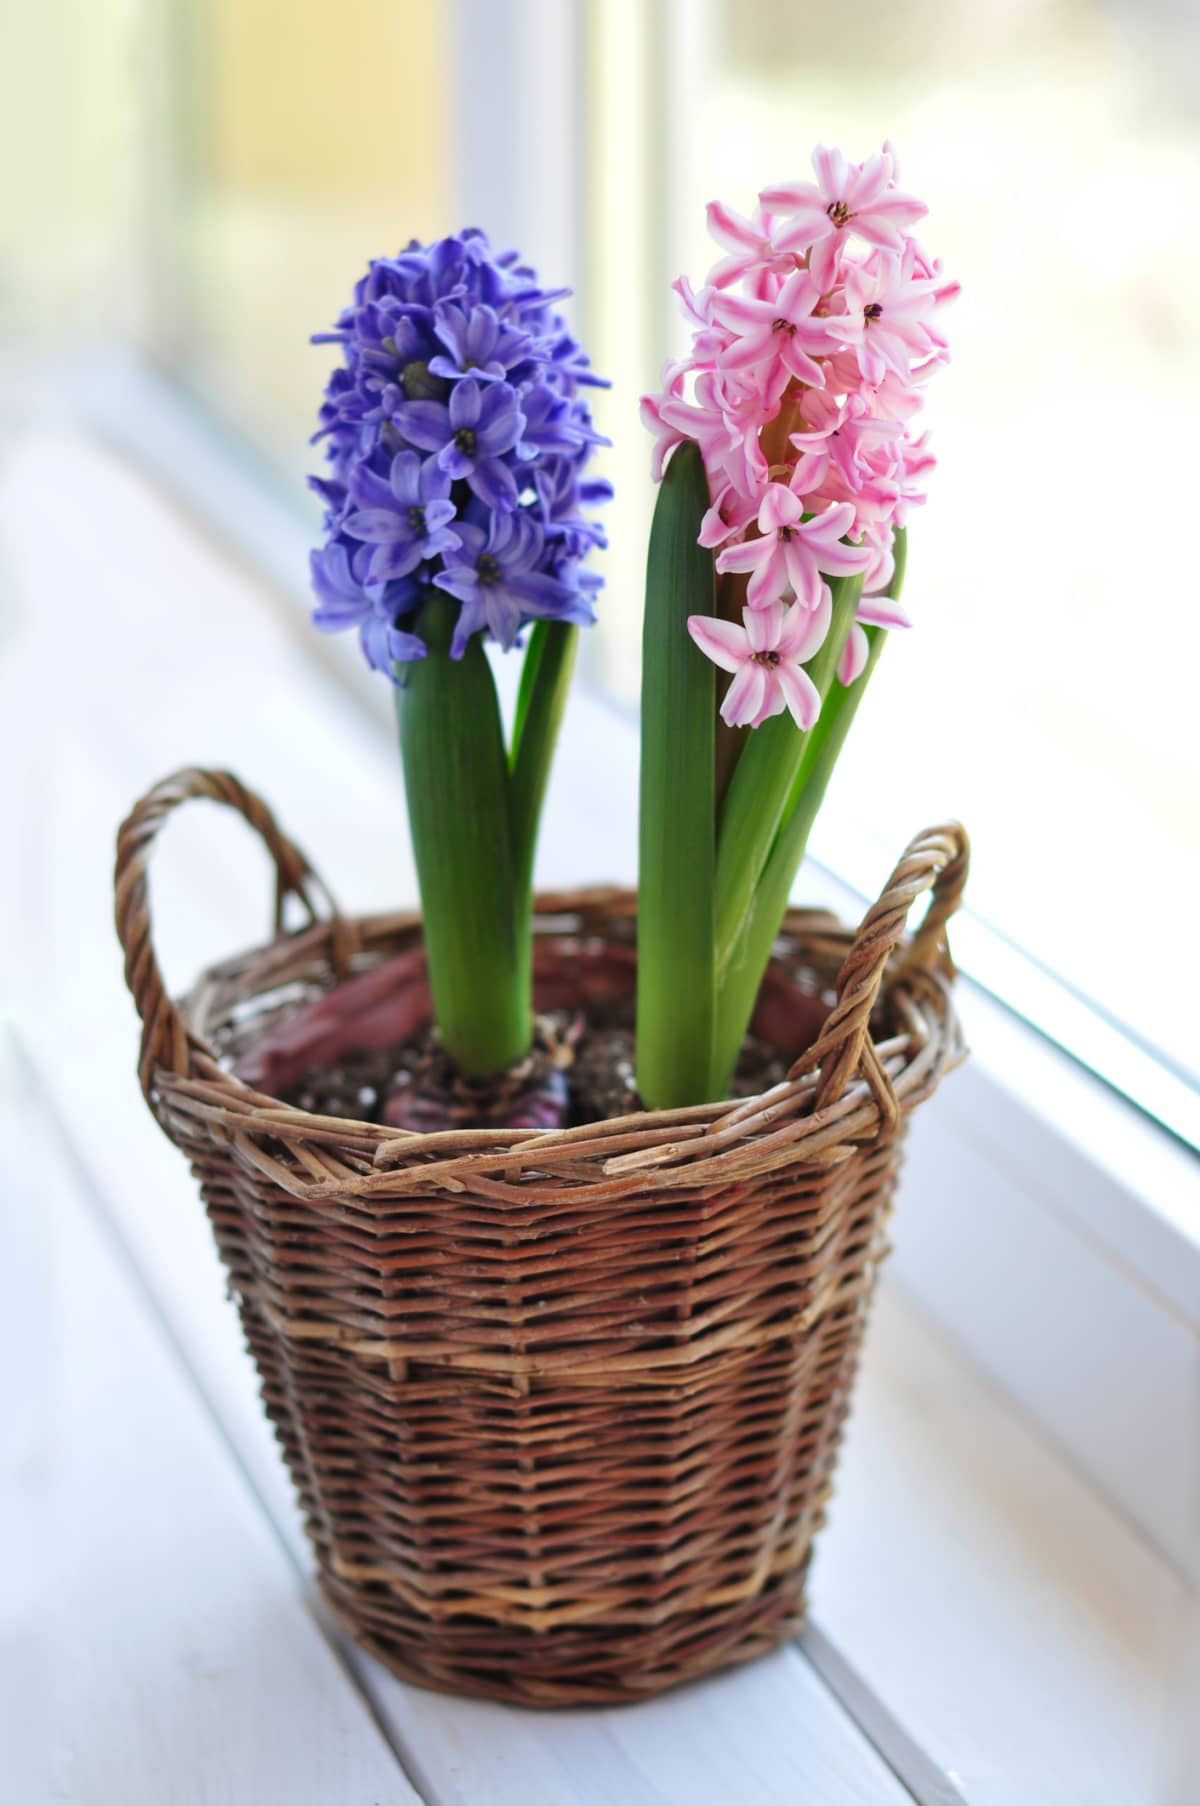 Pink and blue hyacinths in a flowerpot